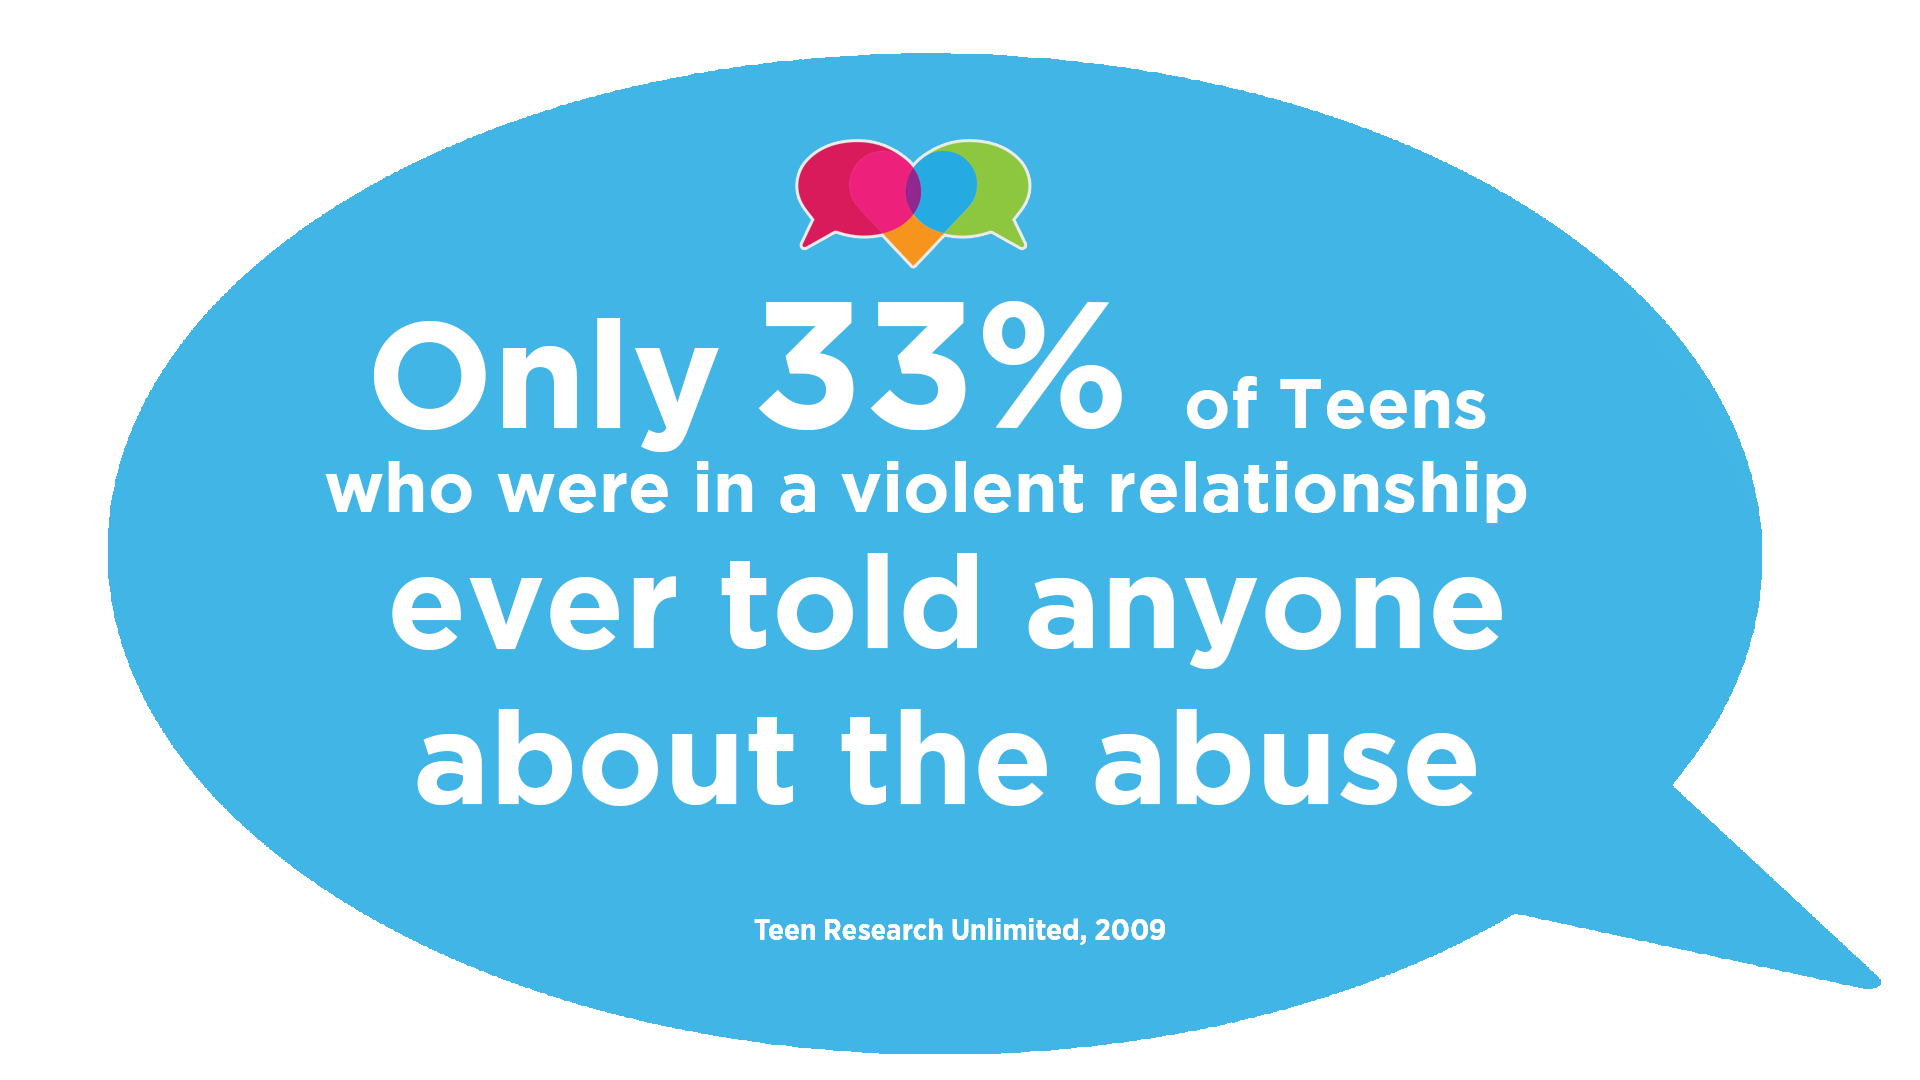 Only 33% of teens who were in a violent relationship ever told anyone about the abuse.